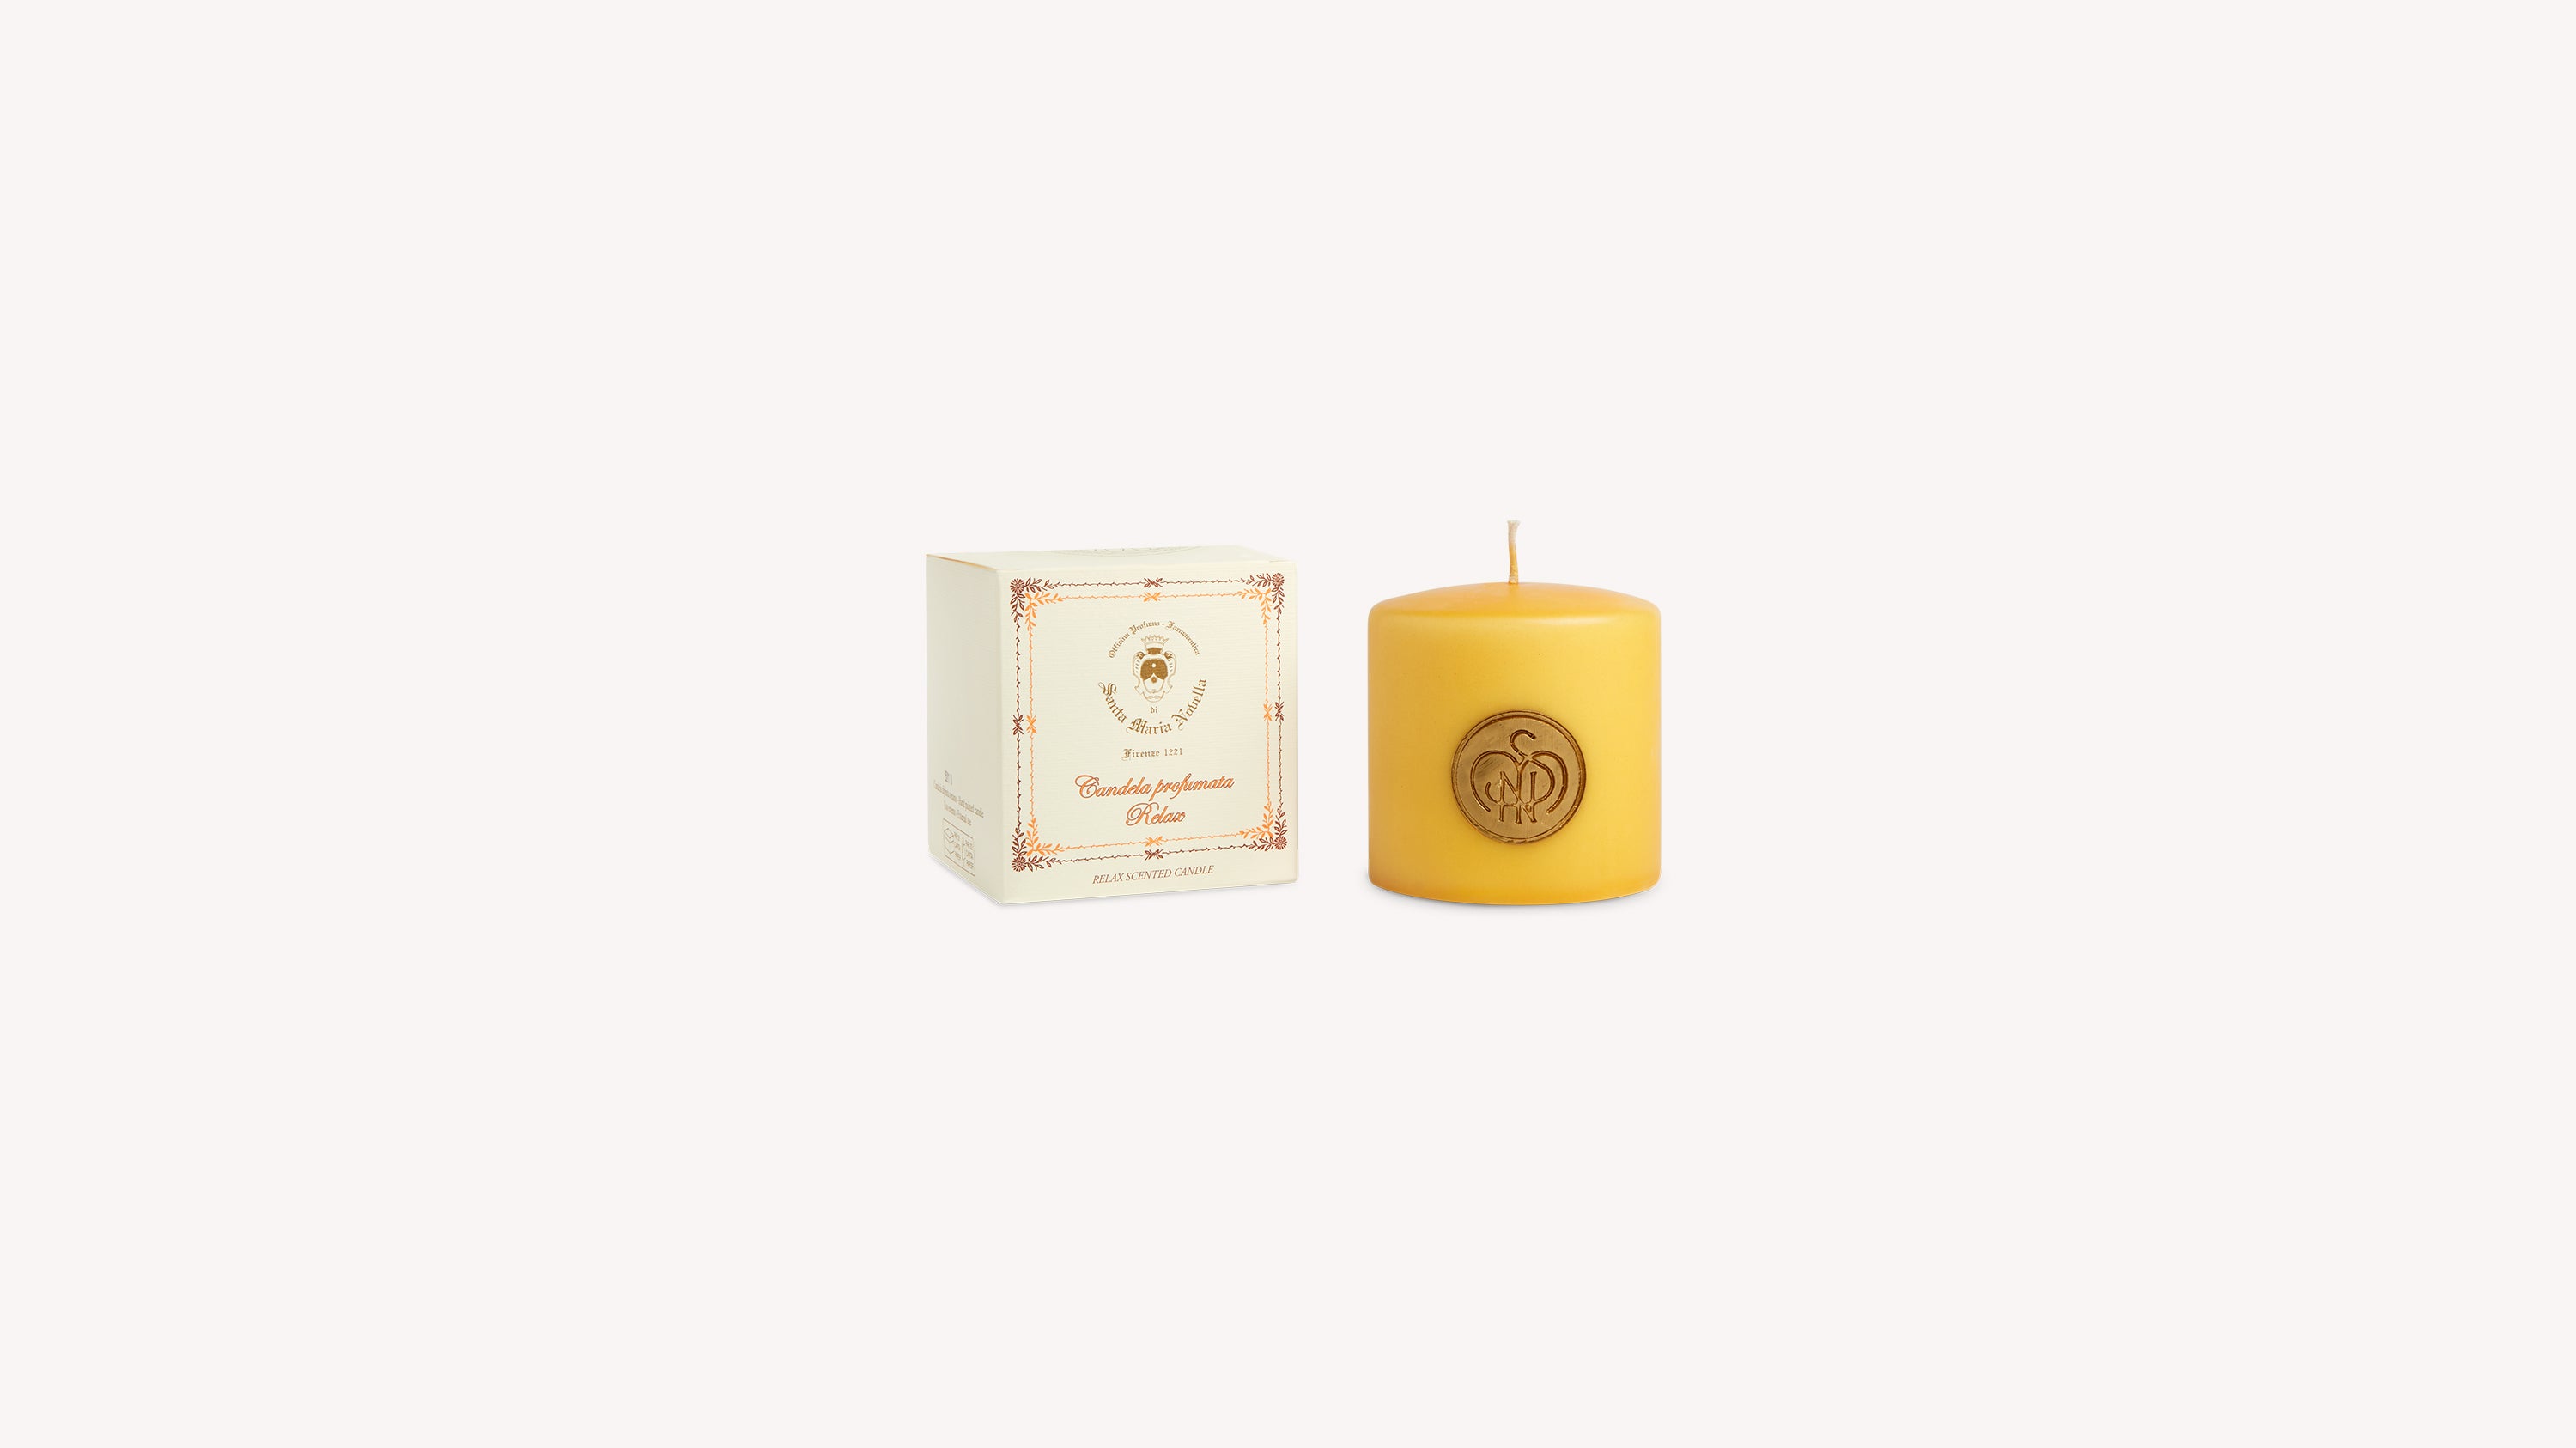 Relax Scented Candle